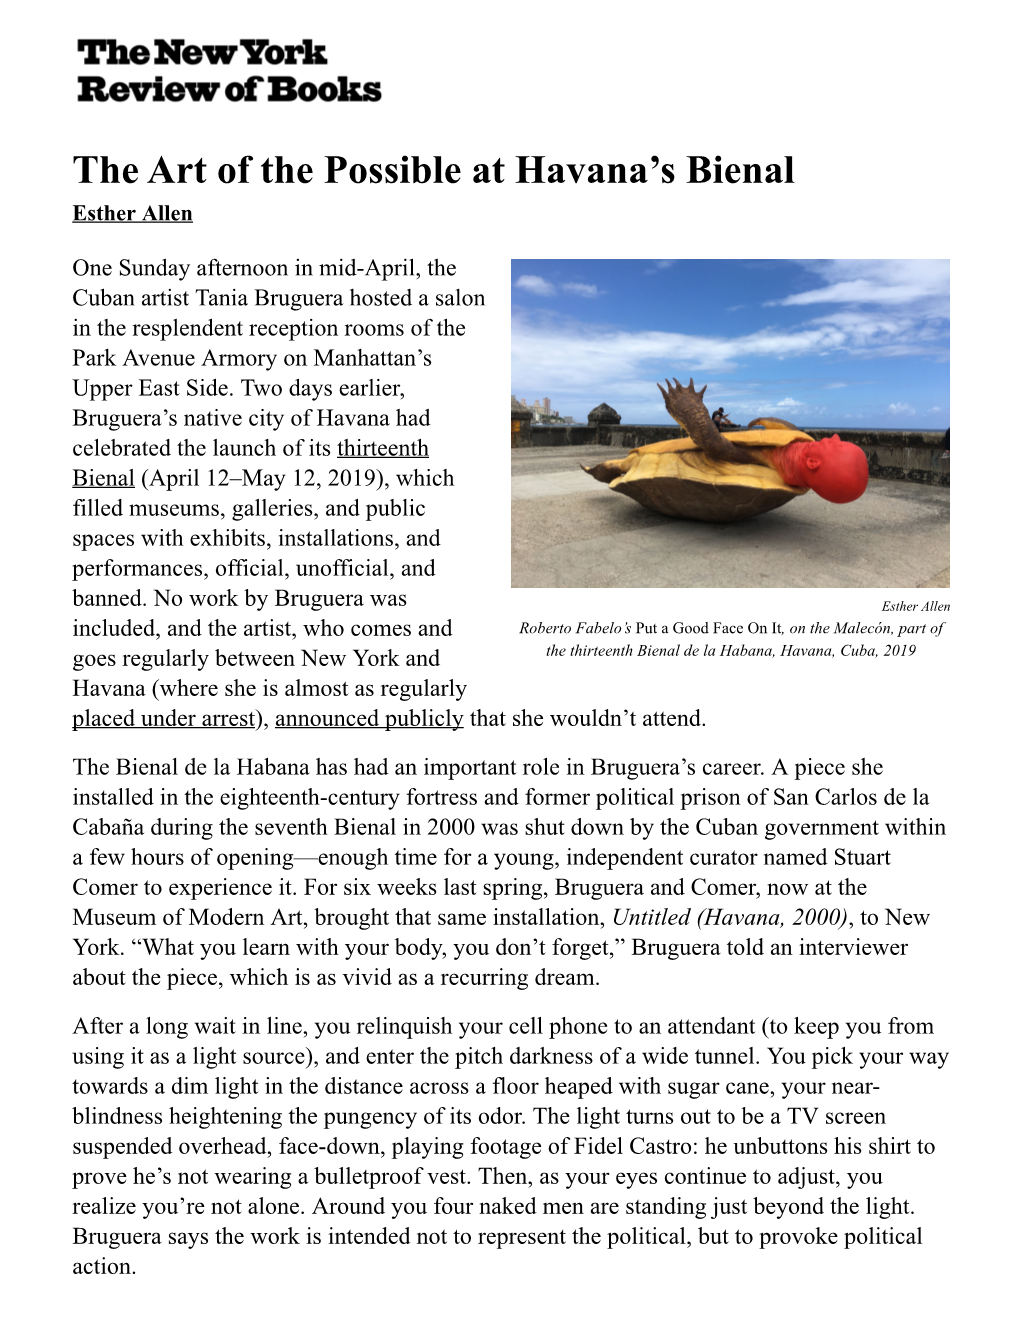 The Art of the Possible at Havana's Bienal